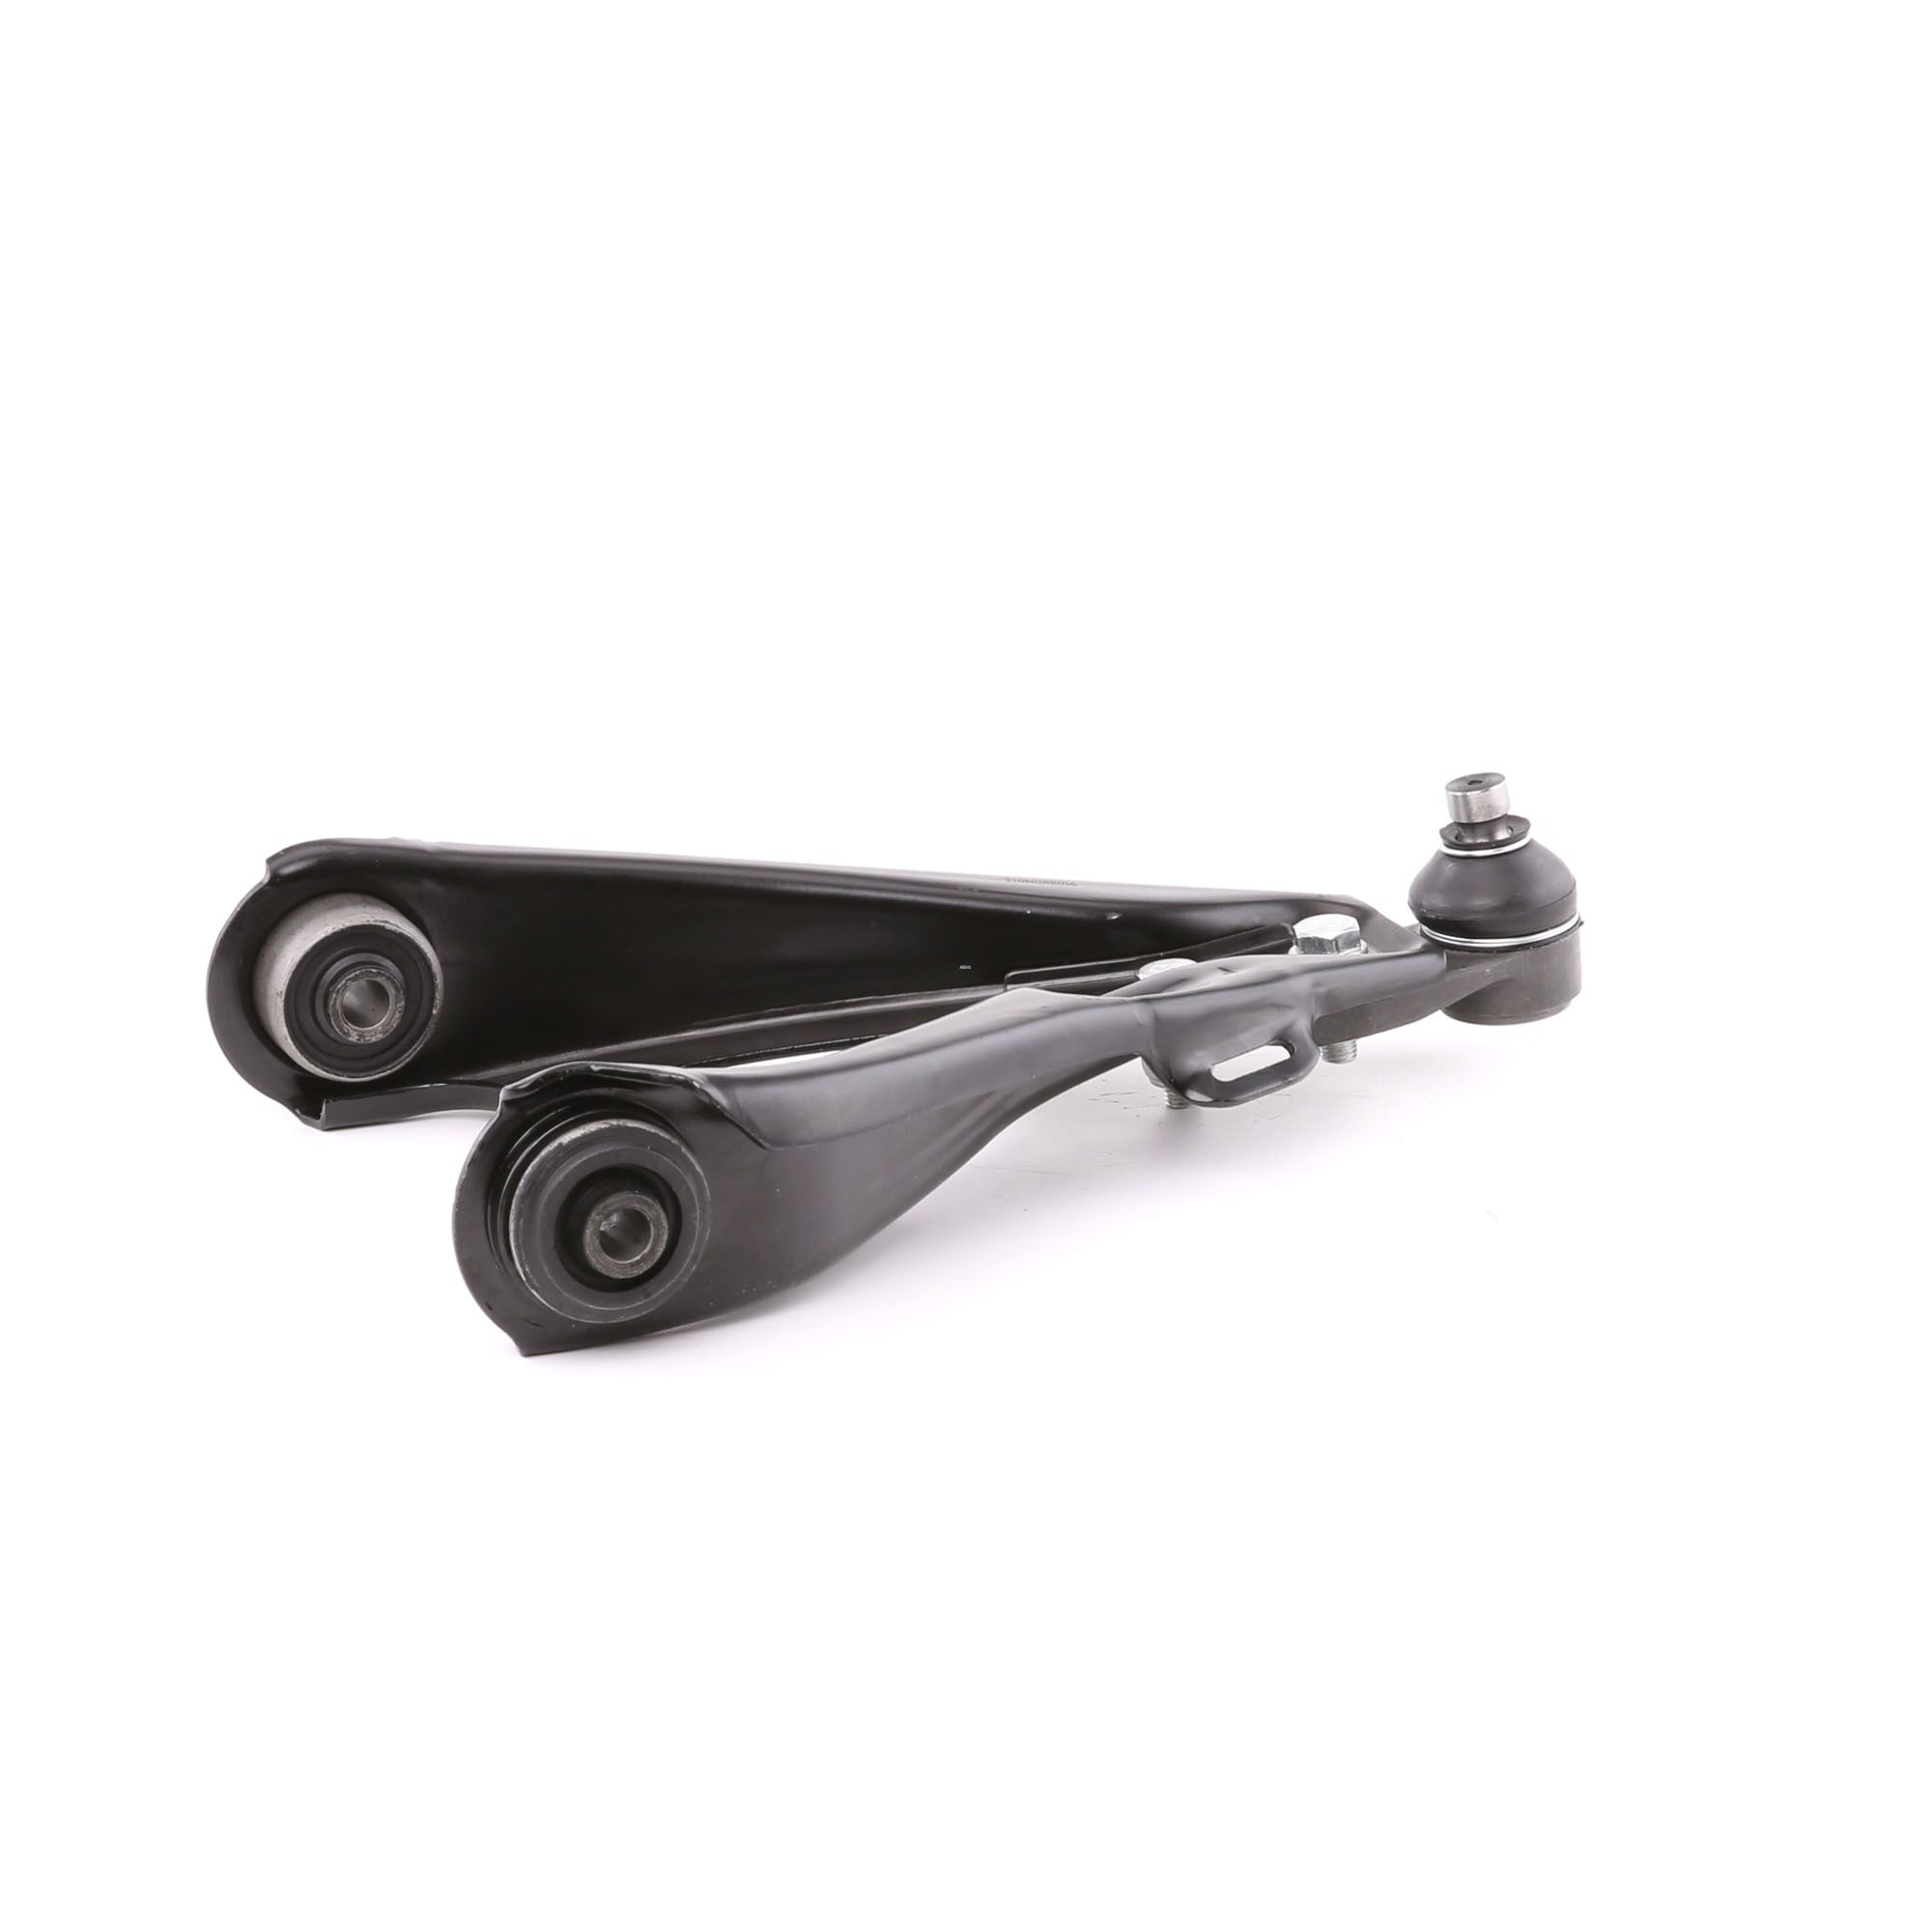 A.B.S. 210862 Suspension arm with ball joint, with rubber mount, Control Arm, Steel, Cone Size: 16 mm